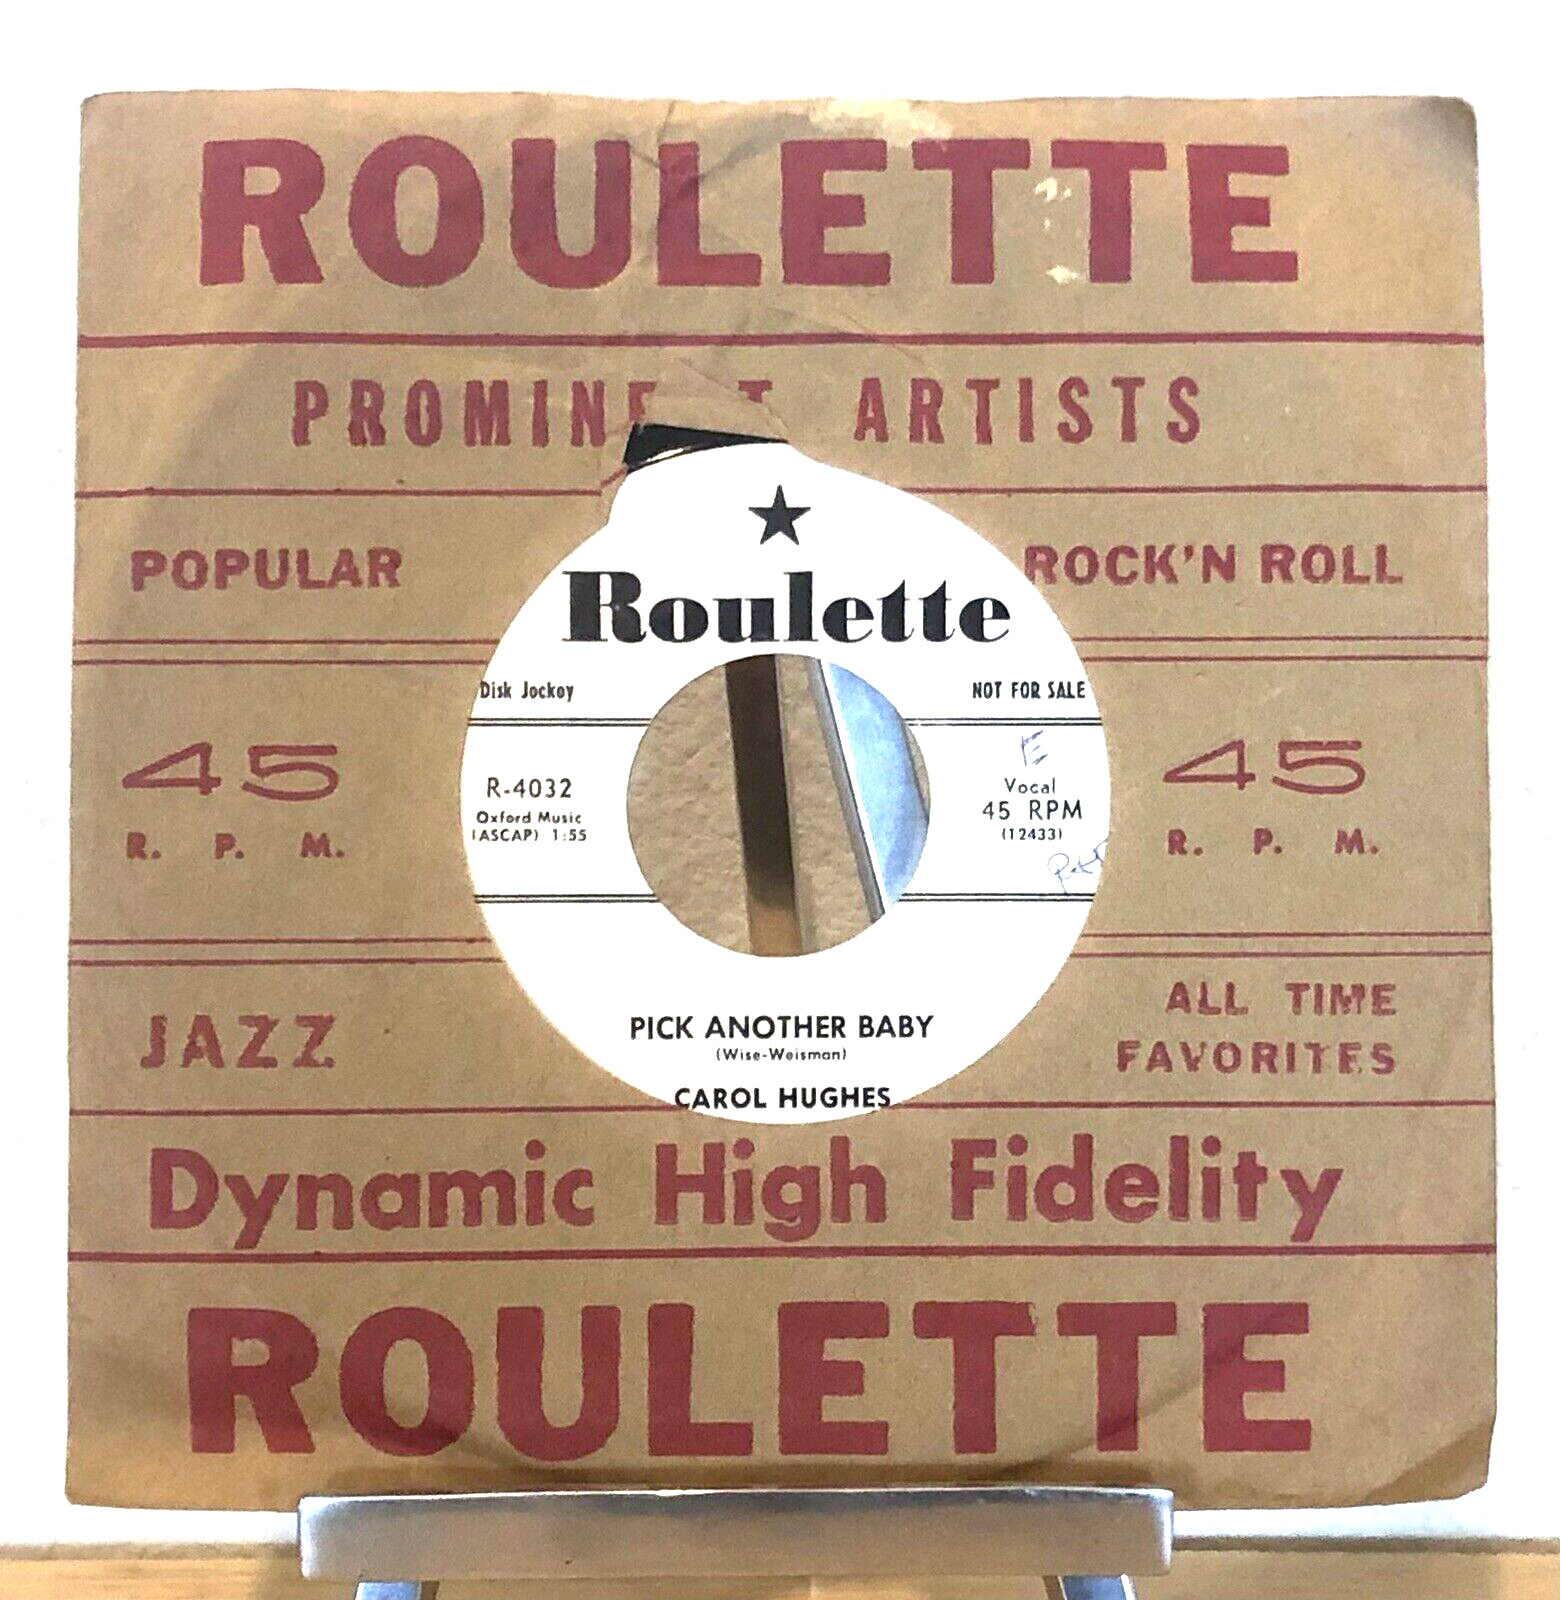 VINTAGE 1957 ROULETTE PROMO CAROL HUGHES PICK ANOTHER BABY 45 RPM RECORD